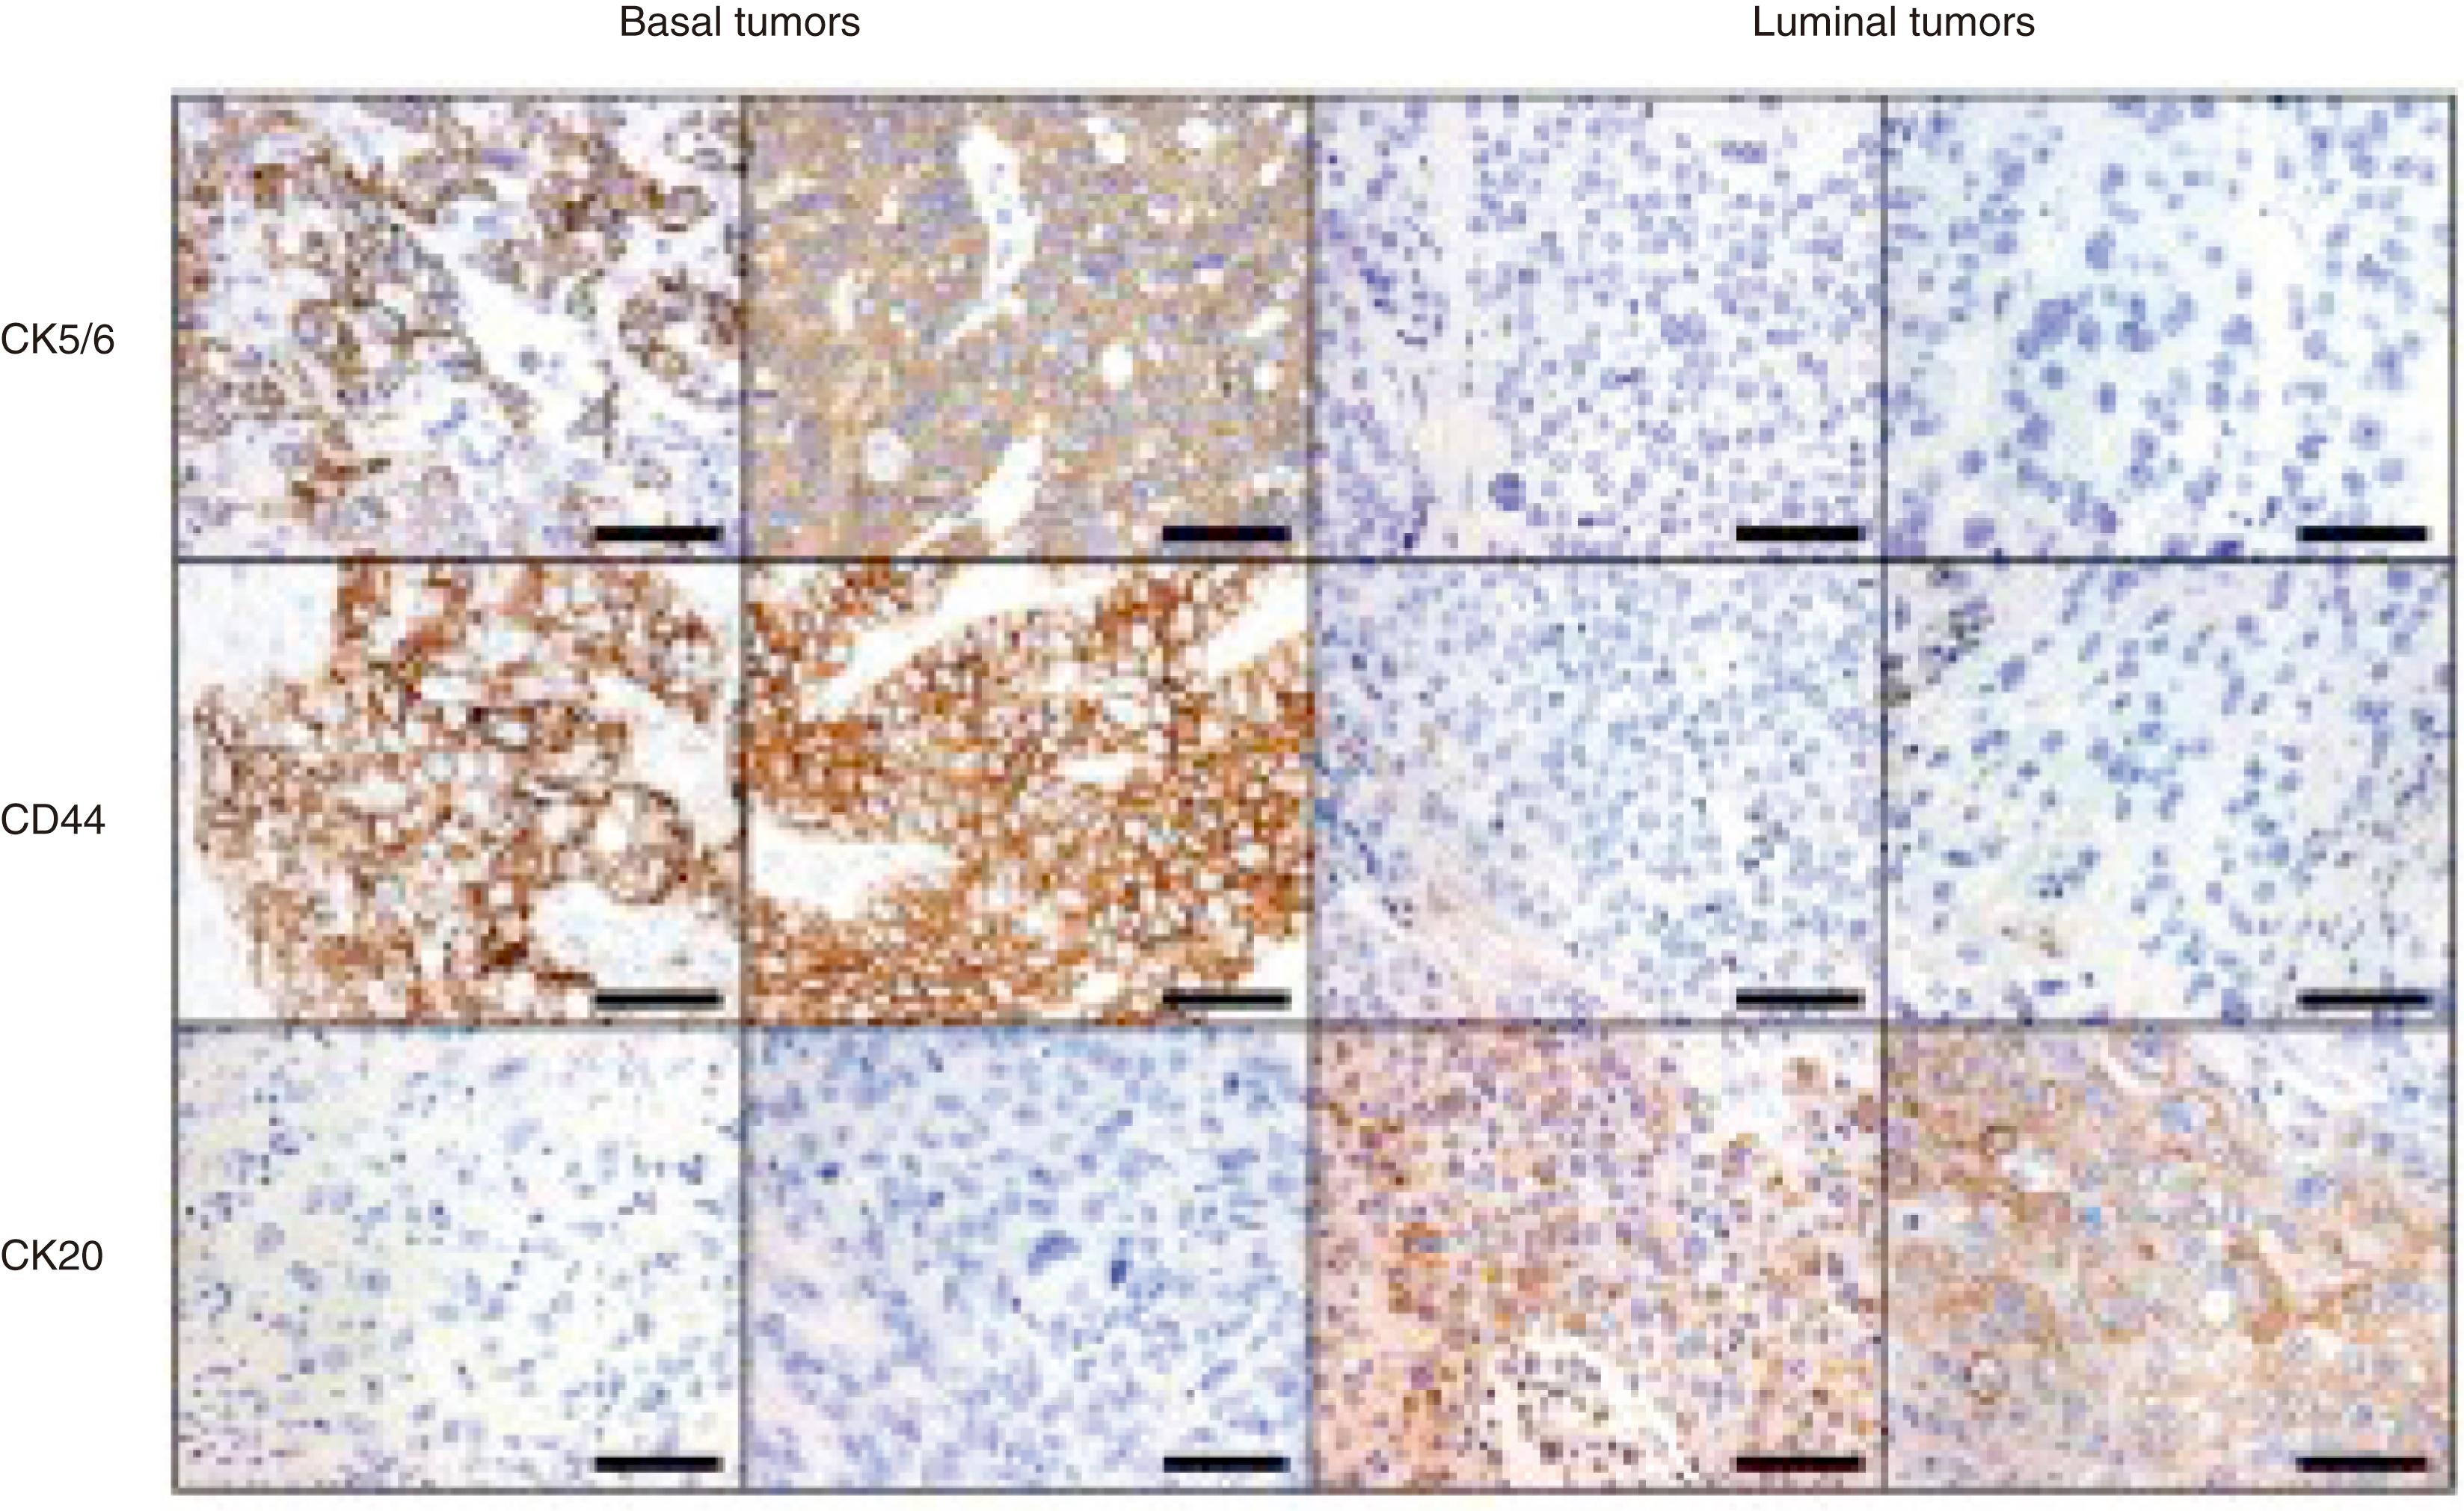 Fig. 17.12, Immunohistochemical analysis of basal and luminal markers expression in bladder cancer. The basal and luminal immunoprofiles (CK5/6+, CD44+, CK20− and CK5/6−, CD44−, CK20+, respectively) are shown in basal (left) and luminal (right) tumors that were categorized as such based on gene expression profiling is shown.